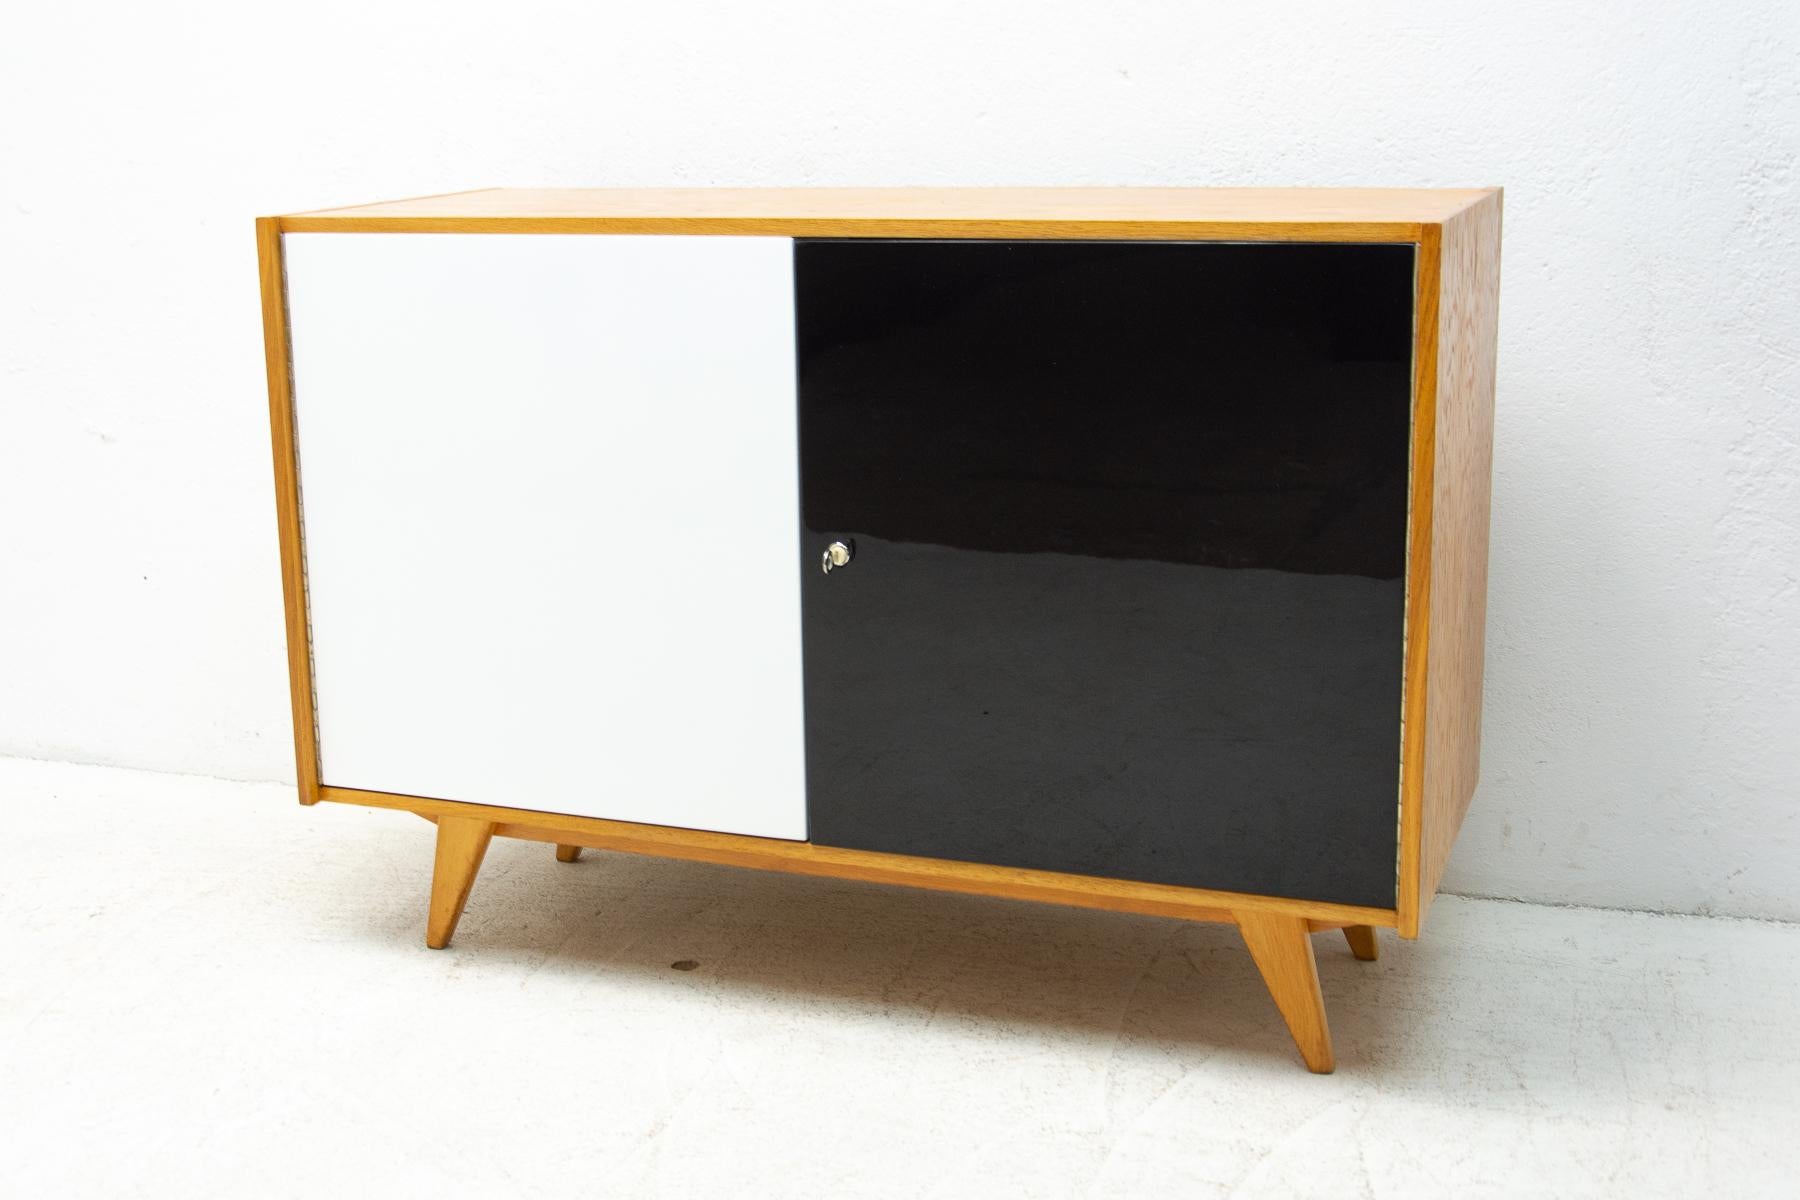 Midcentury sideboard-cabinet, catalogue No. U-450, designed by Jiri Jiroutek. It´s made of beechwood, veneer, plywood and laminate. In very good condition.

The cabinet comes from the famous Universal series (U-450), which was designed in 1958 for